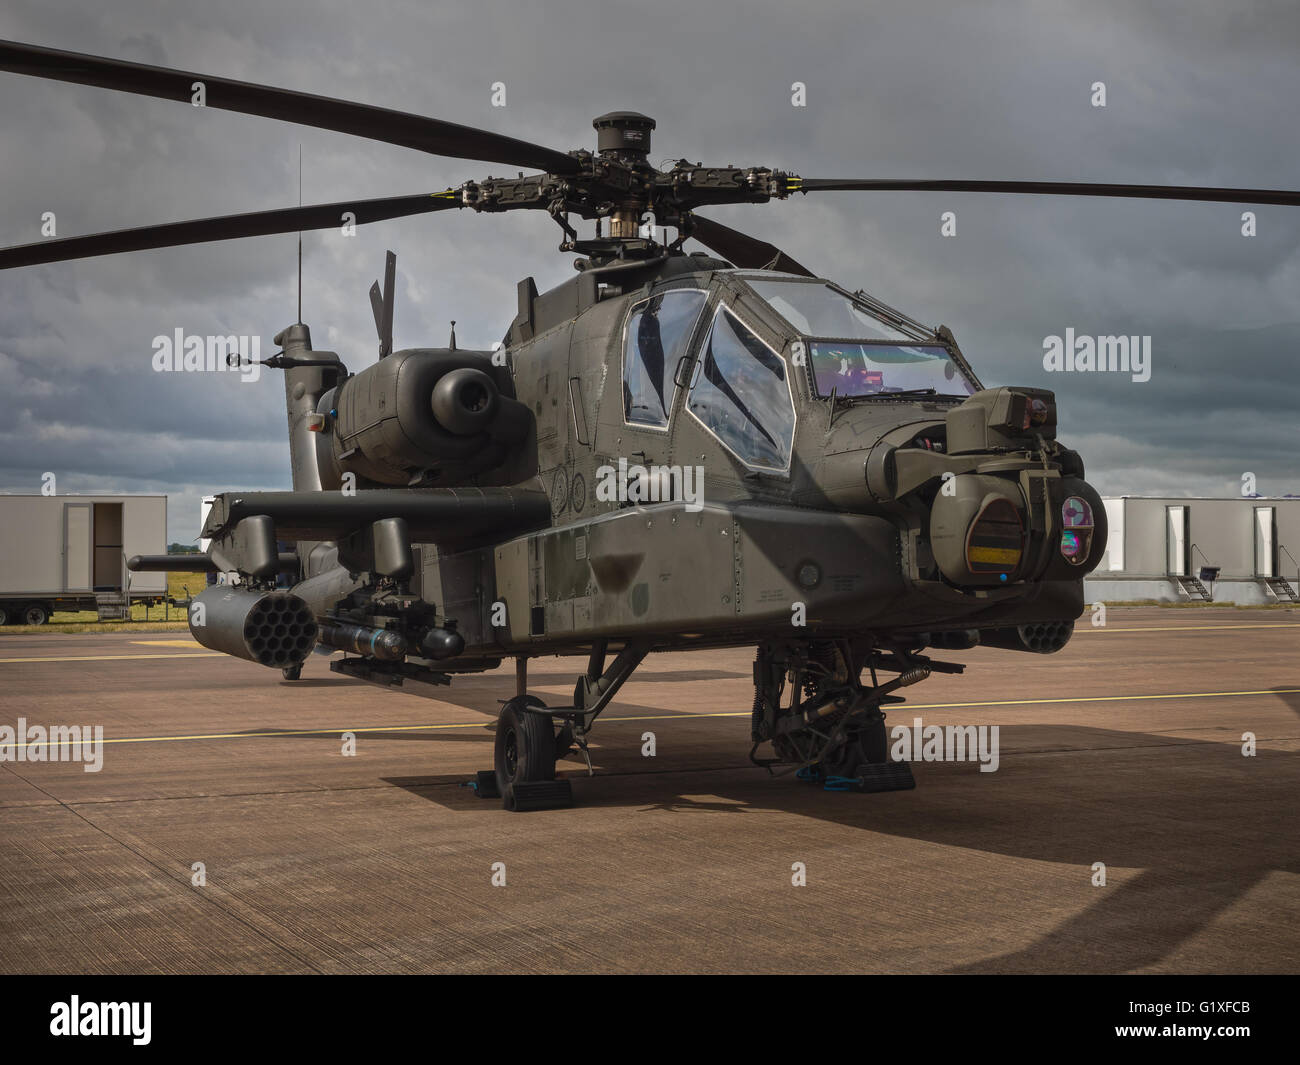 Boeing AH-64 Apache helicopter at rest on airfield apron Stock Photo